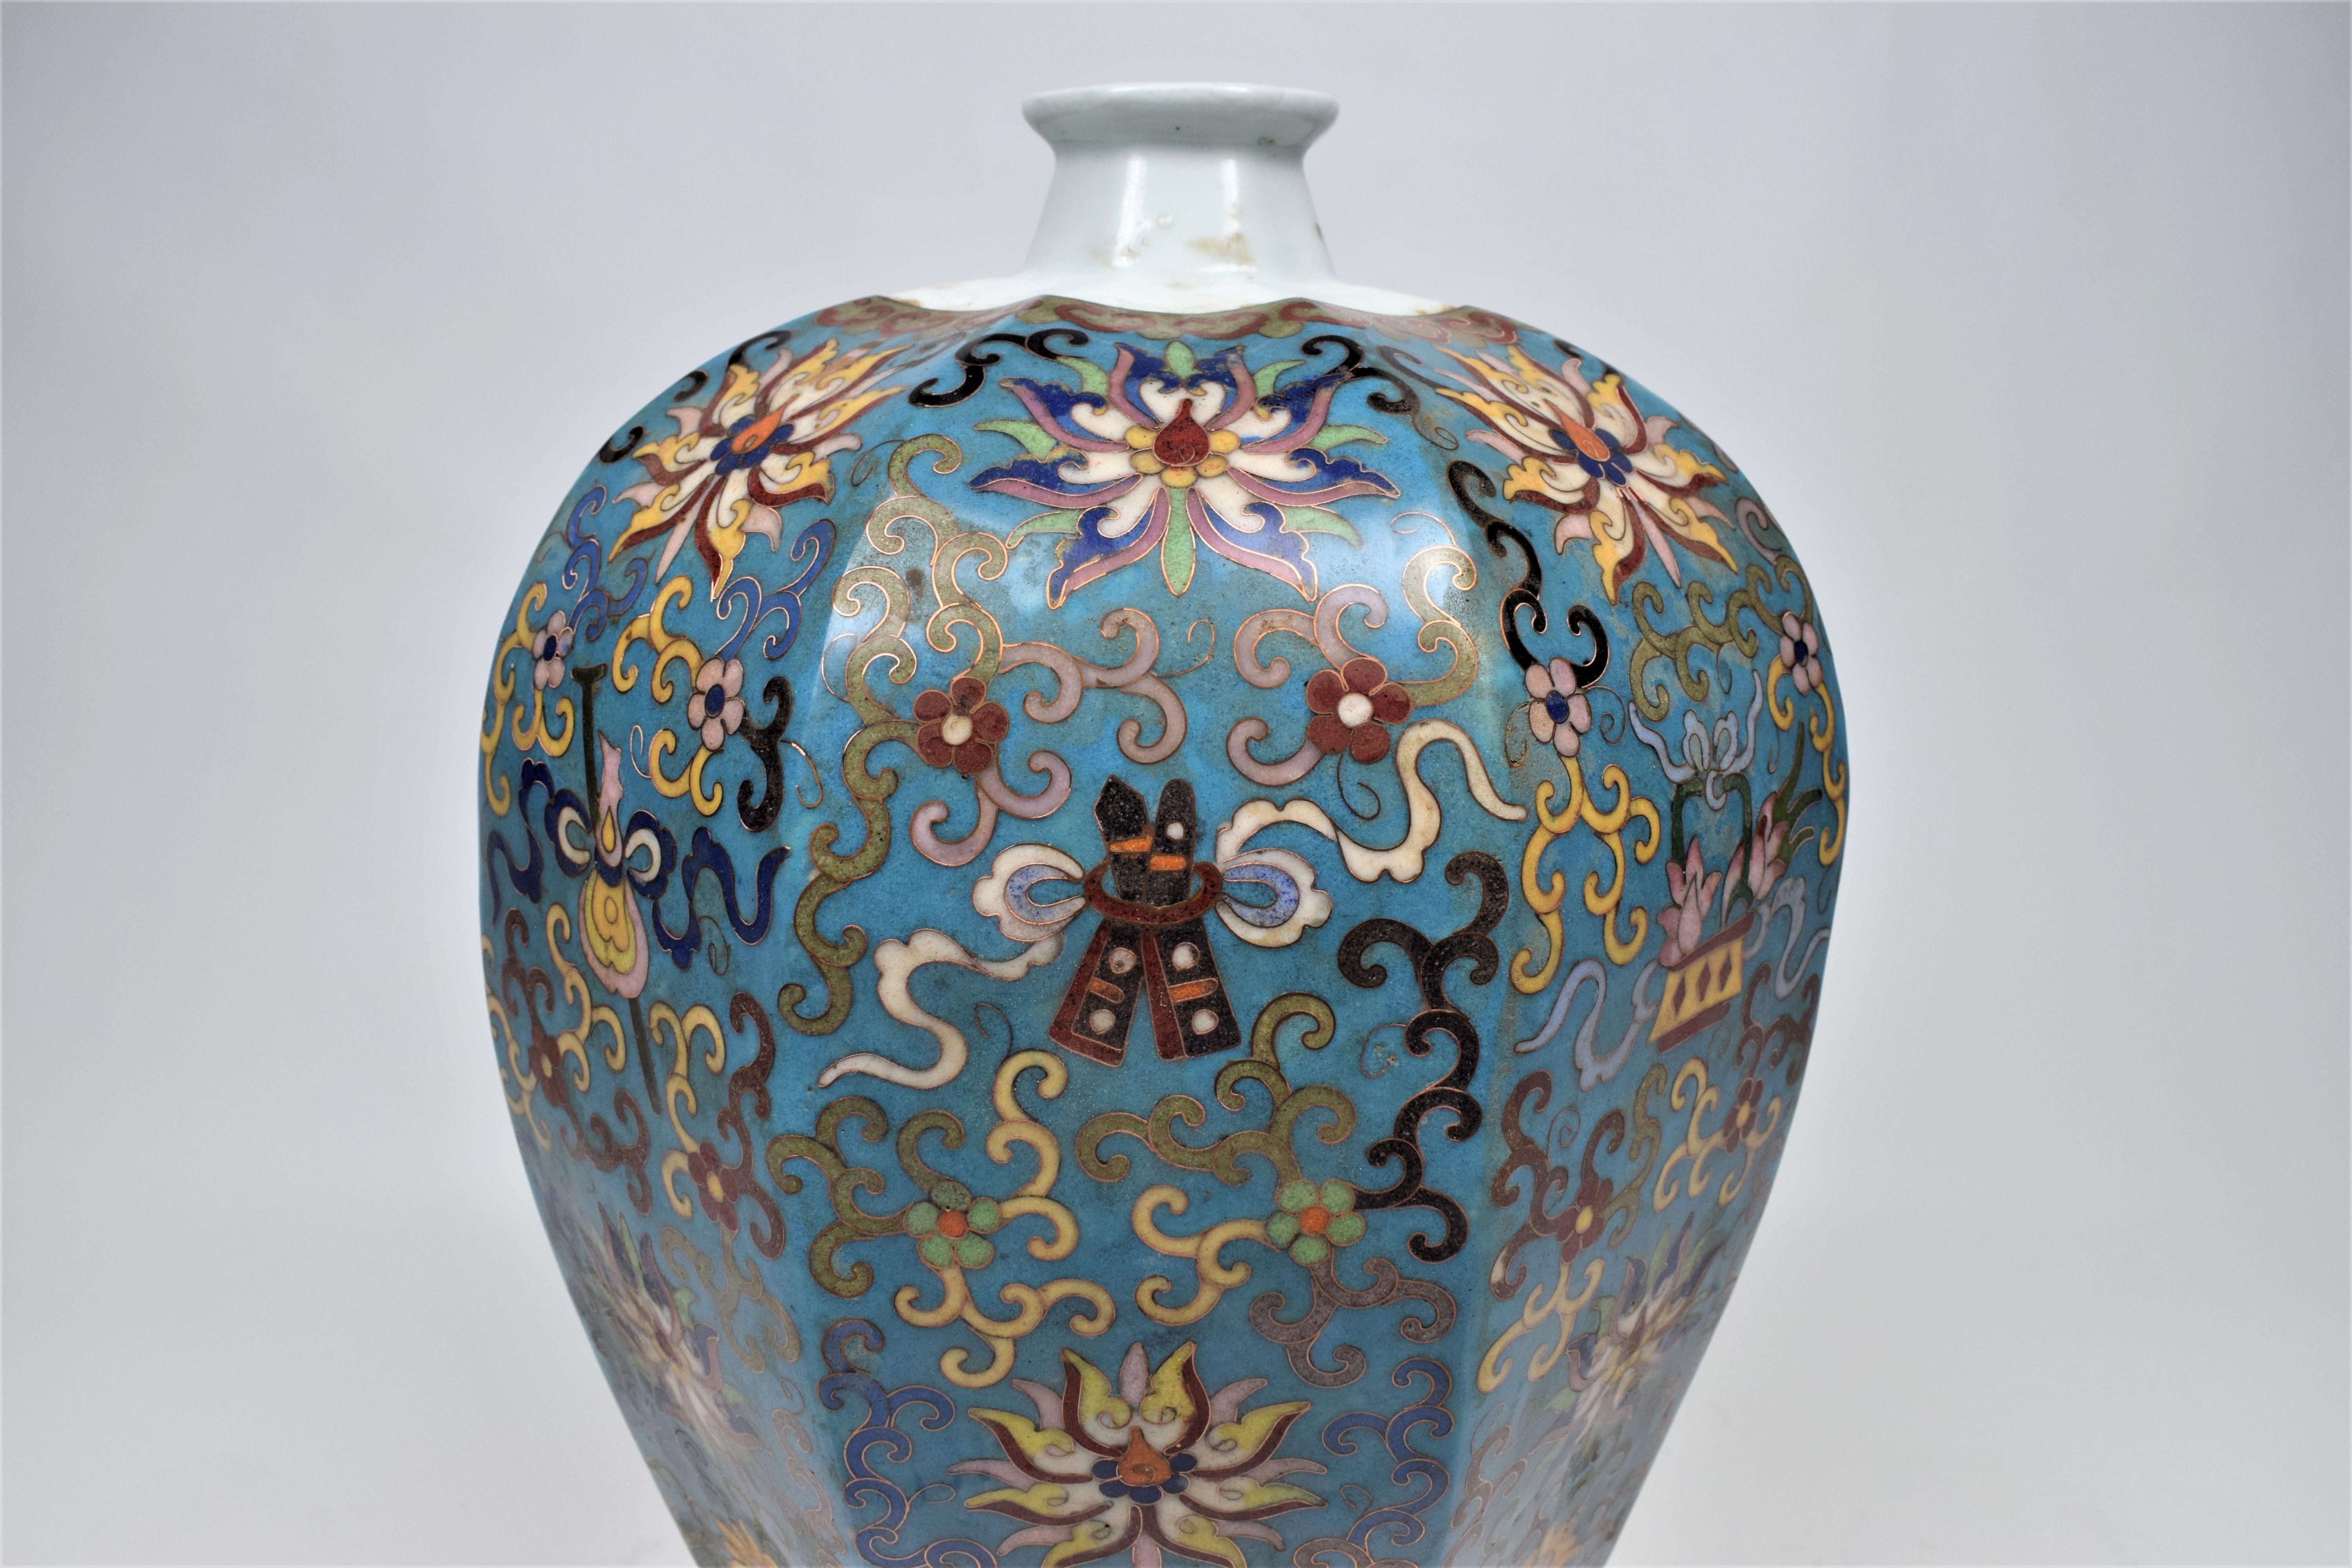 Chinese Large Cloisonné Enamel Bottle Vases Late Qing Dynasty, 19th Century For Sale 2